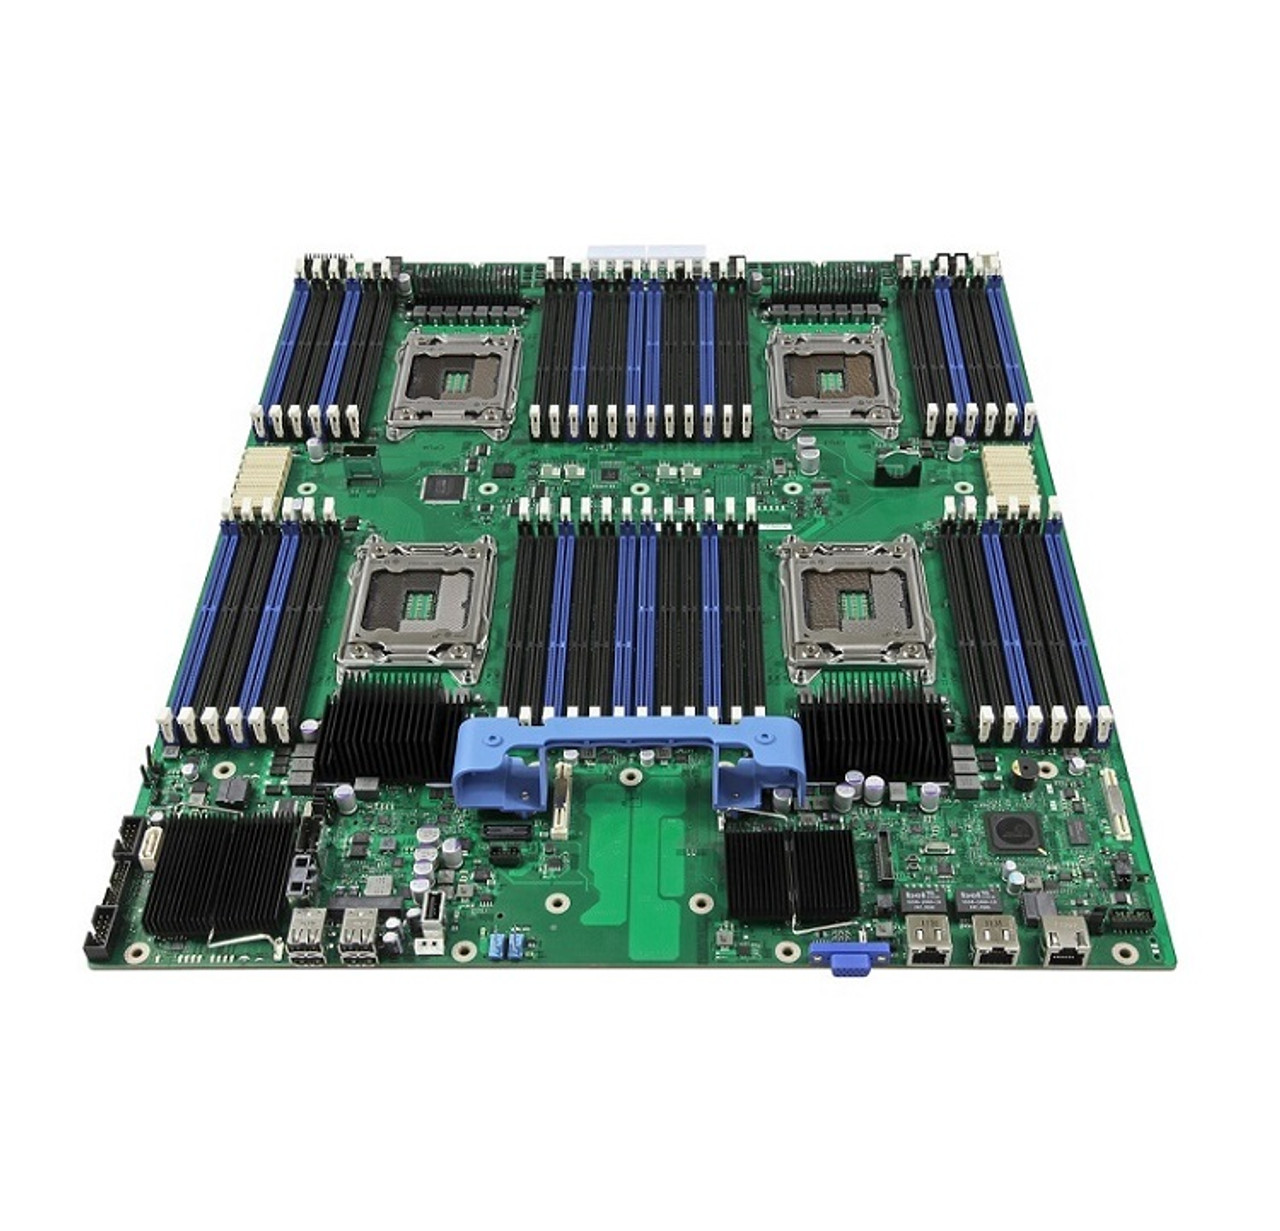 0T688H - Dell System Board (Motherboard) for Dell PowerEdge 2950 G3 Server